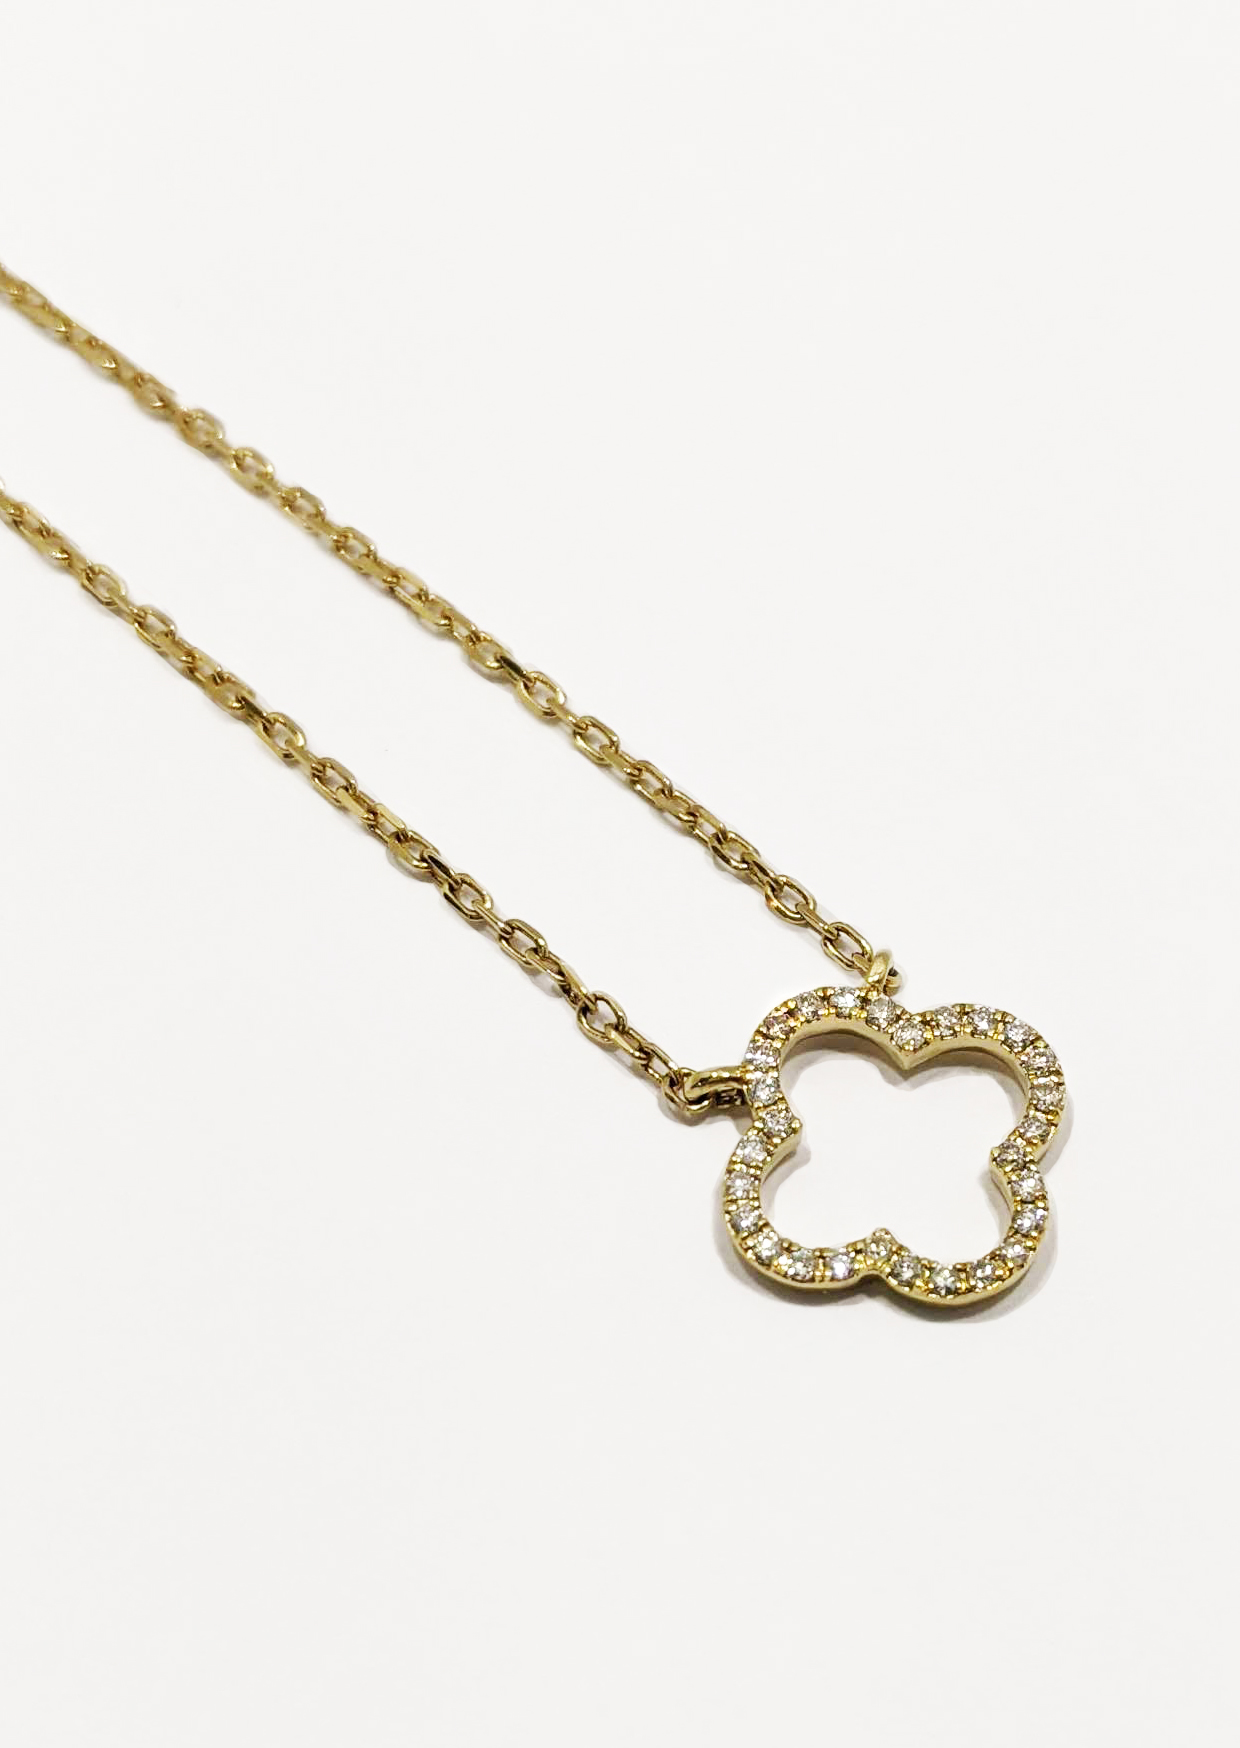 Diamond Clover Necklace 9ct Yellow Gold